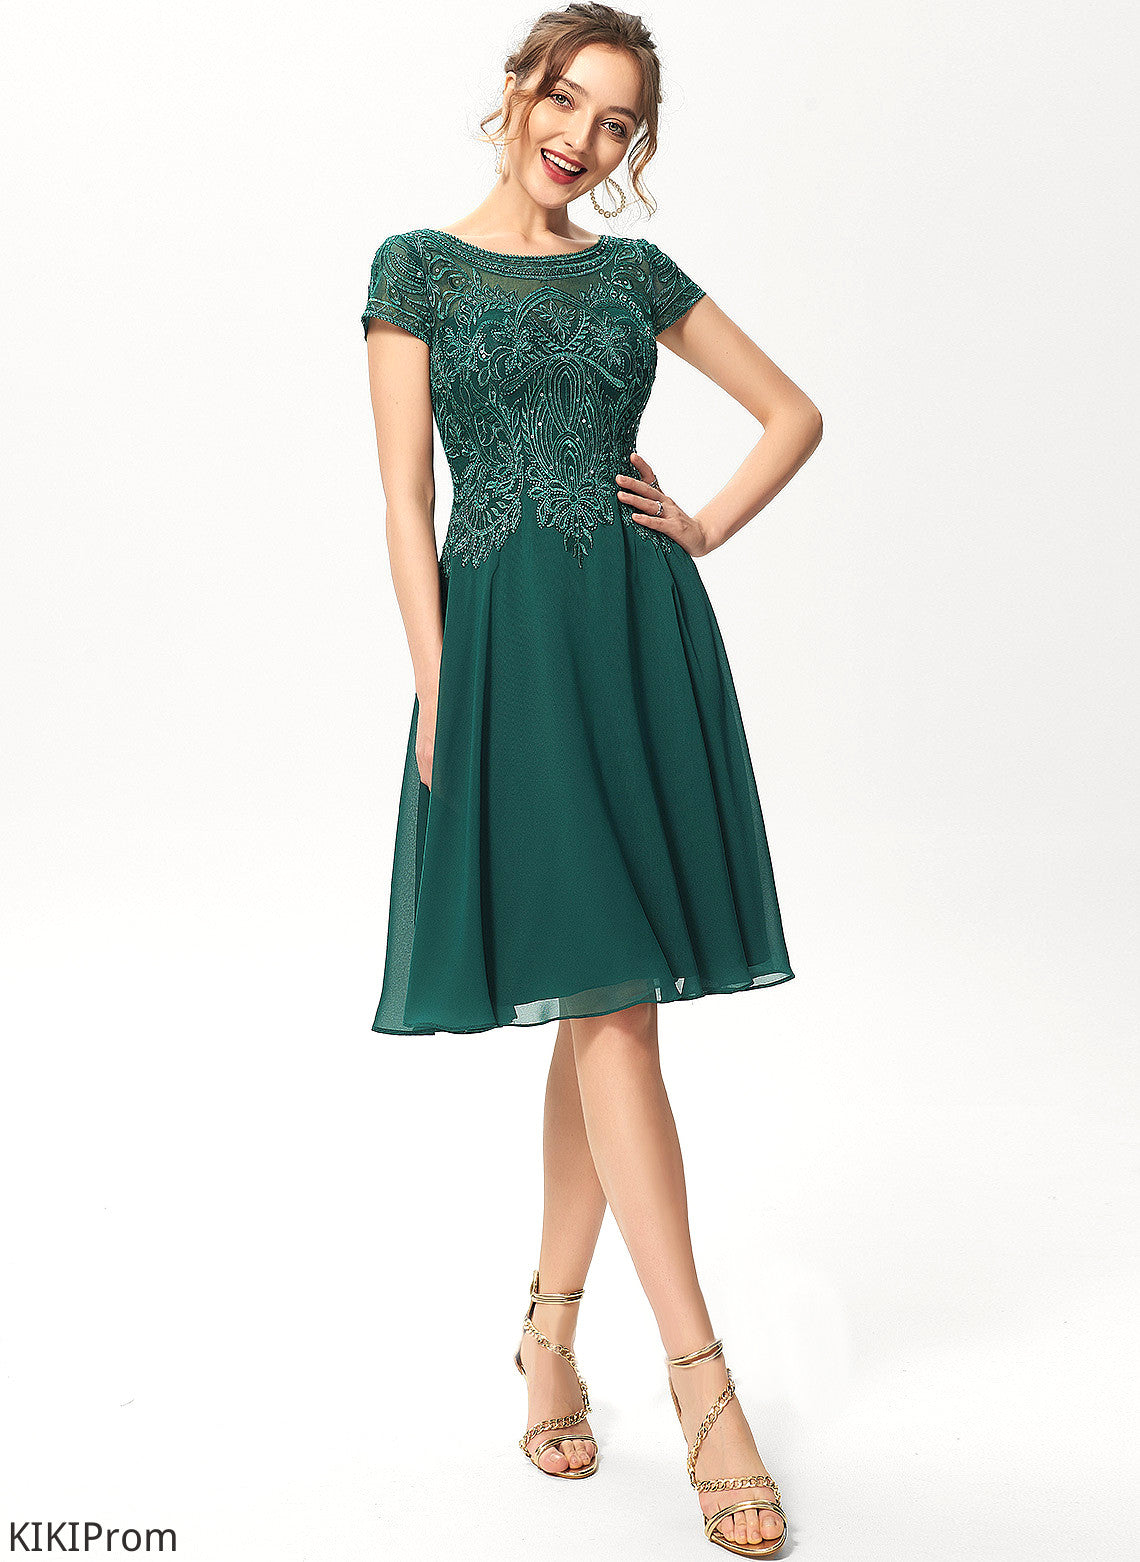 Cocktail Dresses Neck Scoop Trudie Lace Dress Knee-Length Sequins A-Line Chiffon With Cocktail